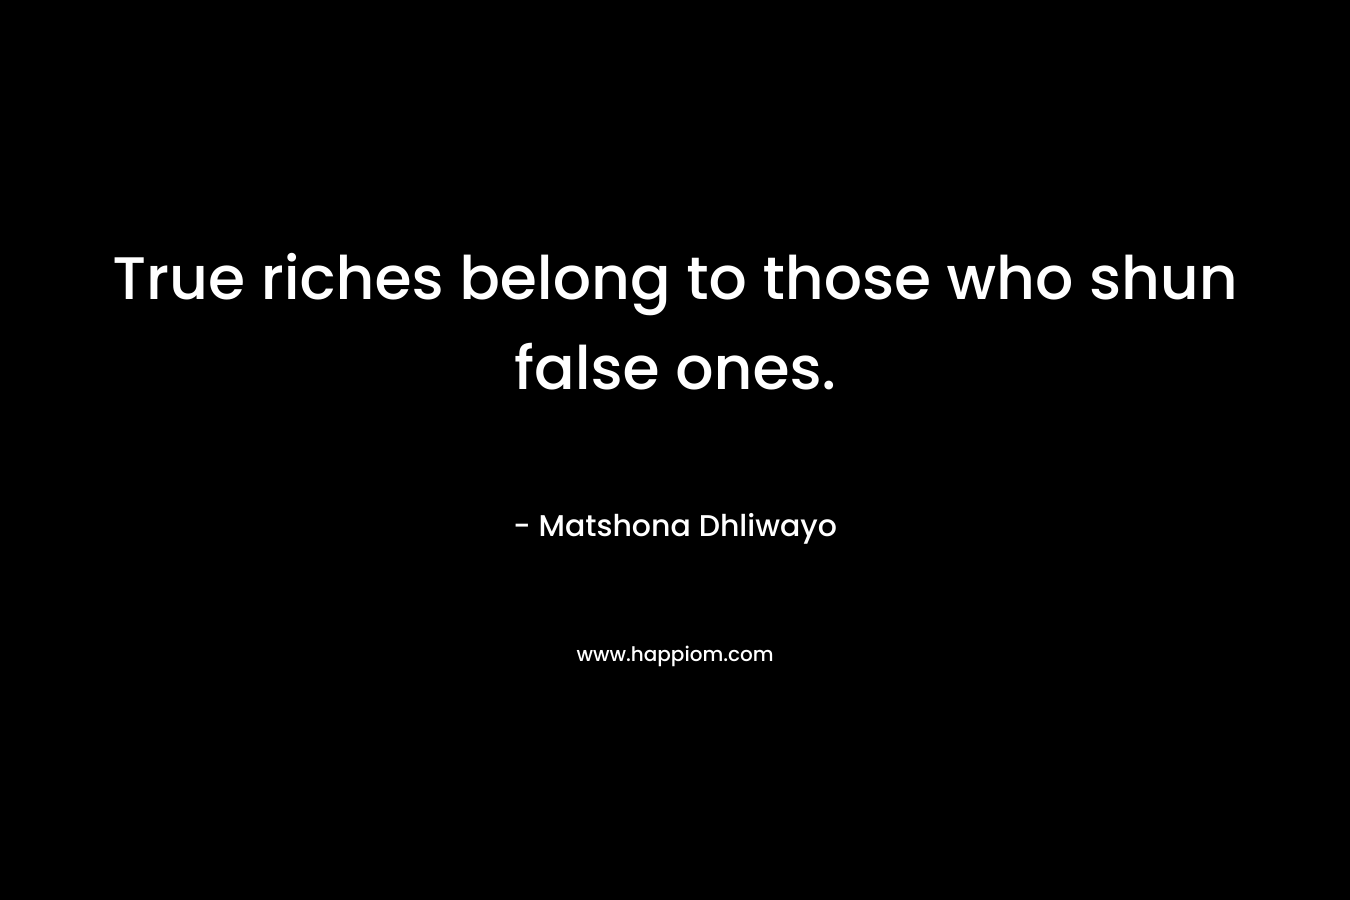 True riches belong to those who shun false ones.